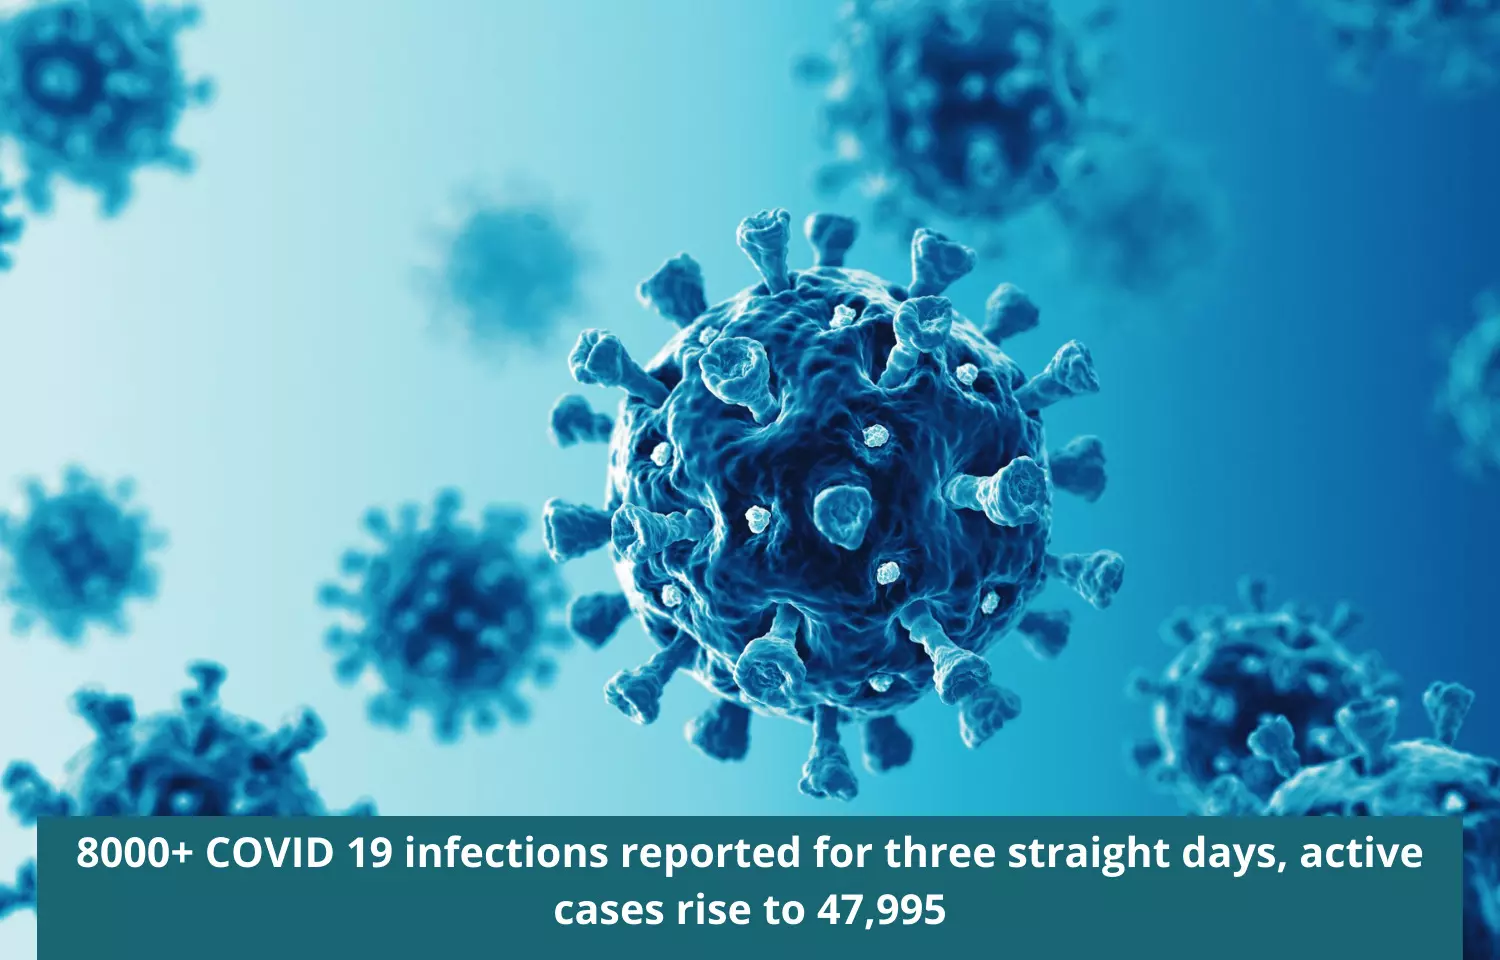 8000+ COVID infections reported for three straight days, active cases rise to 47,995